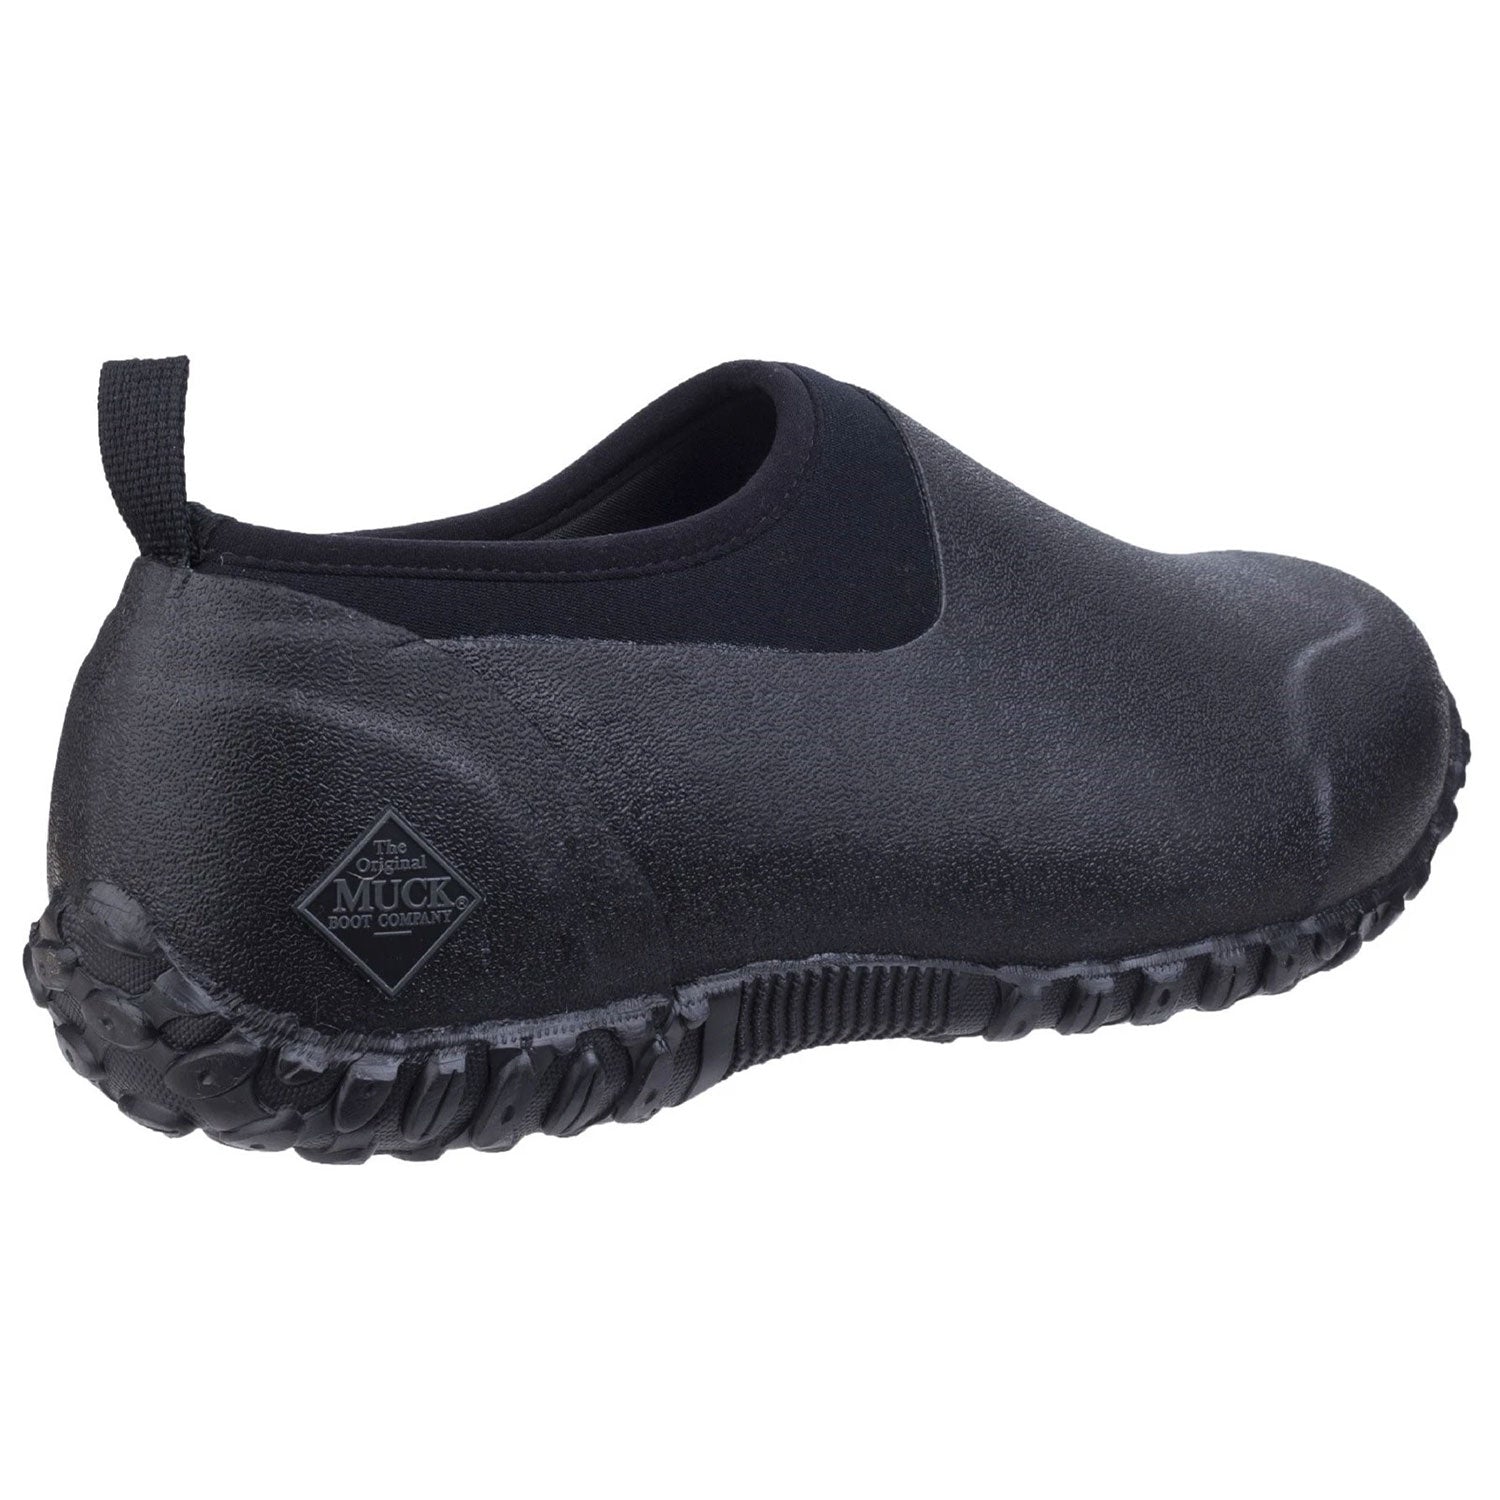 Muck Boots Mens RHS Muckster II Low Shoes in Black 